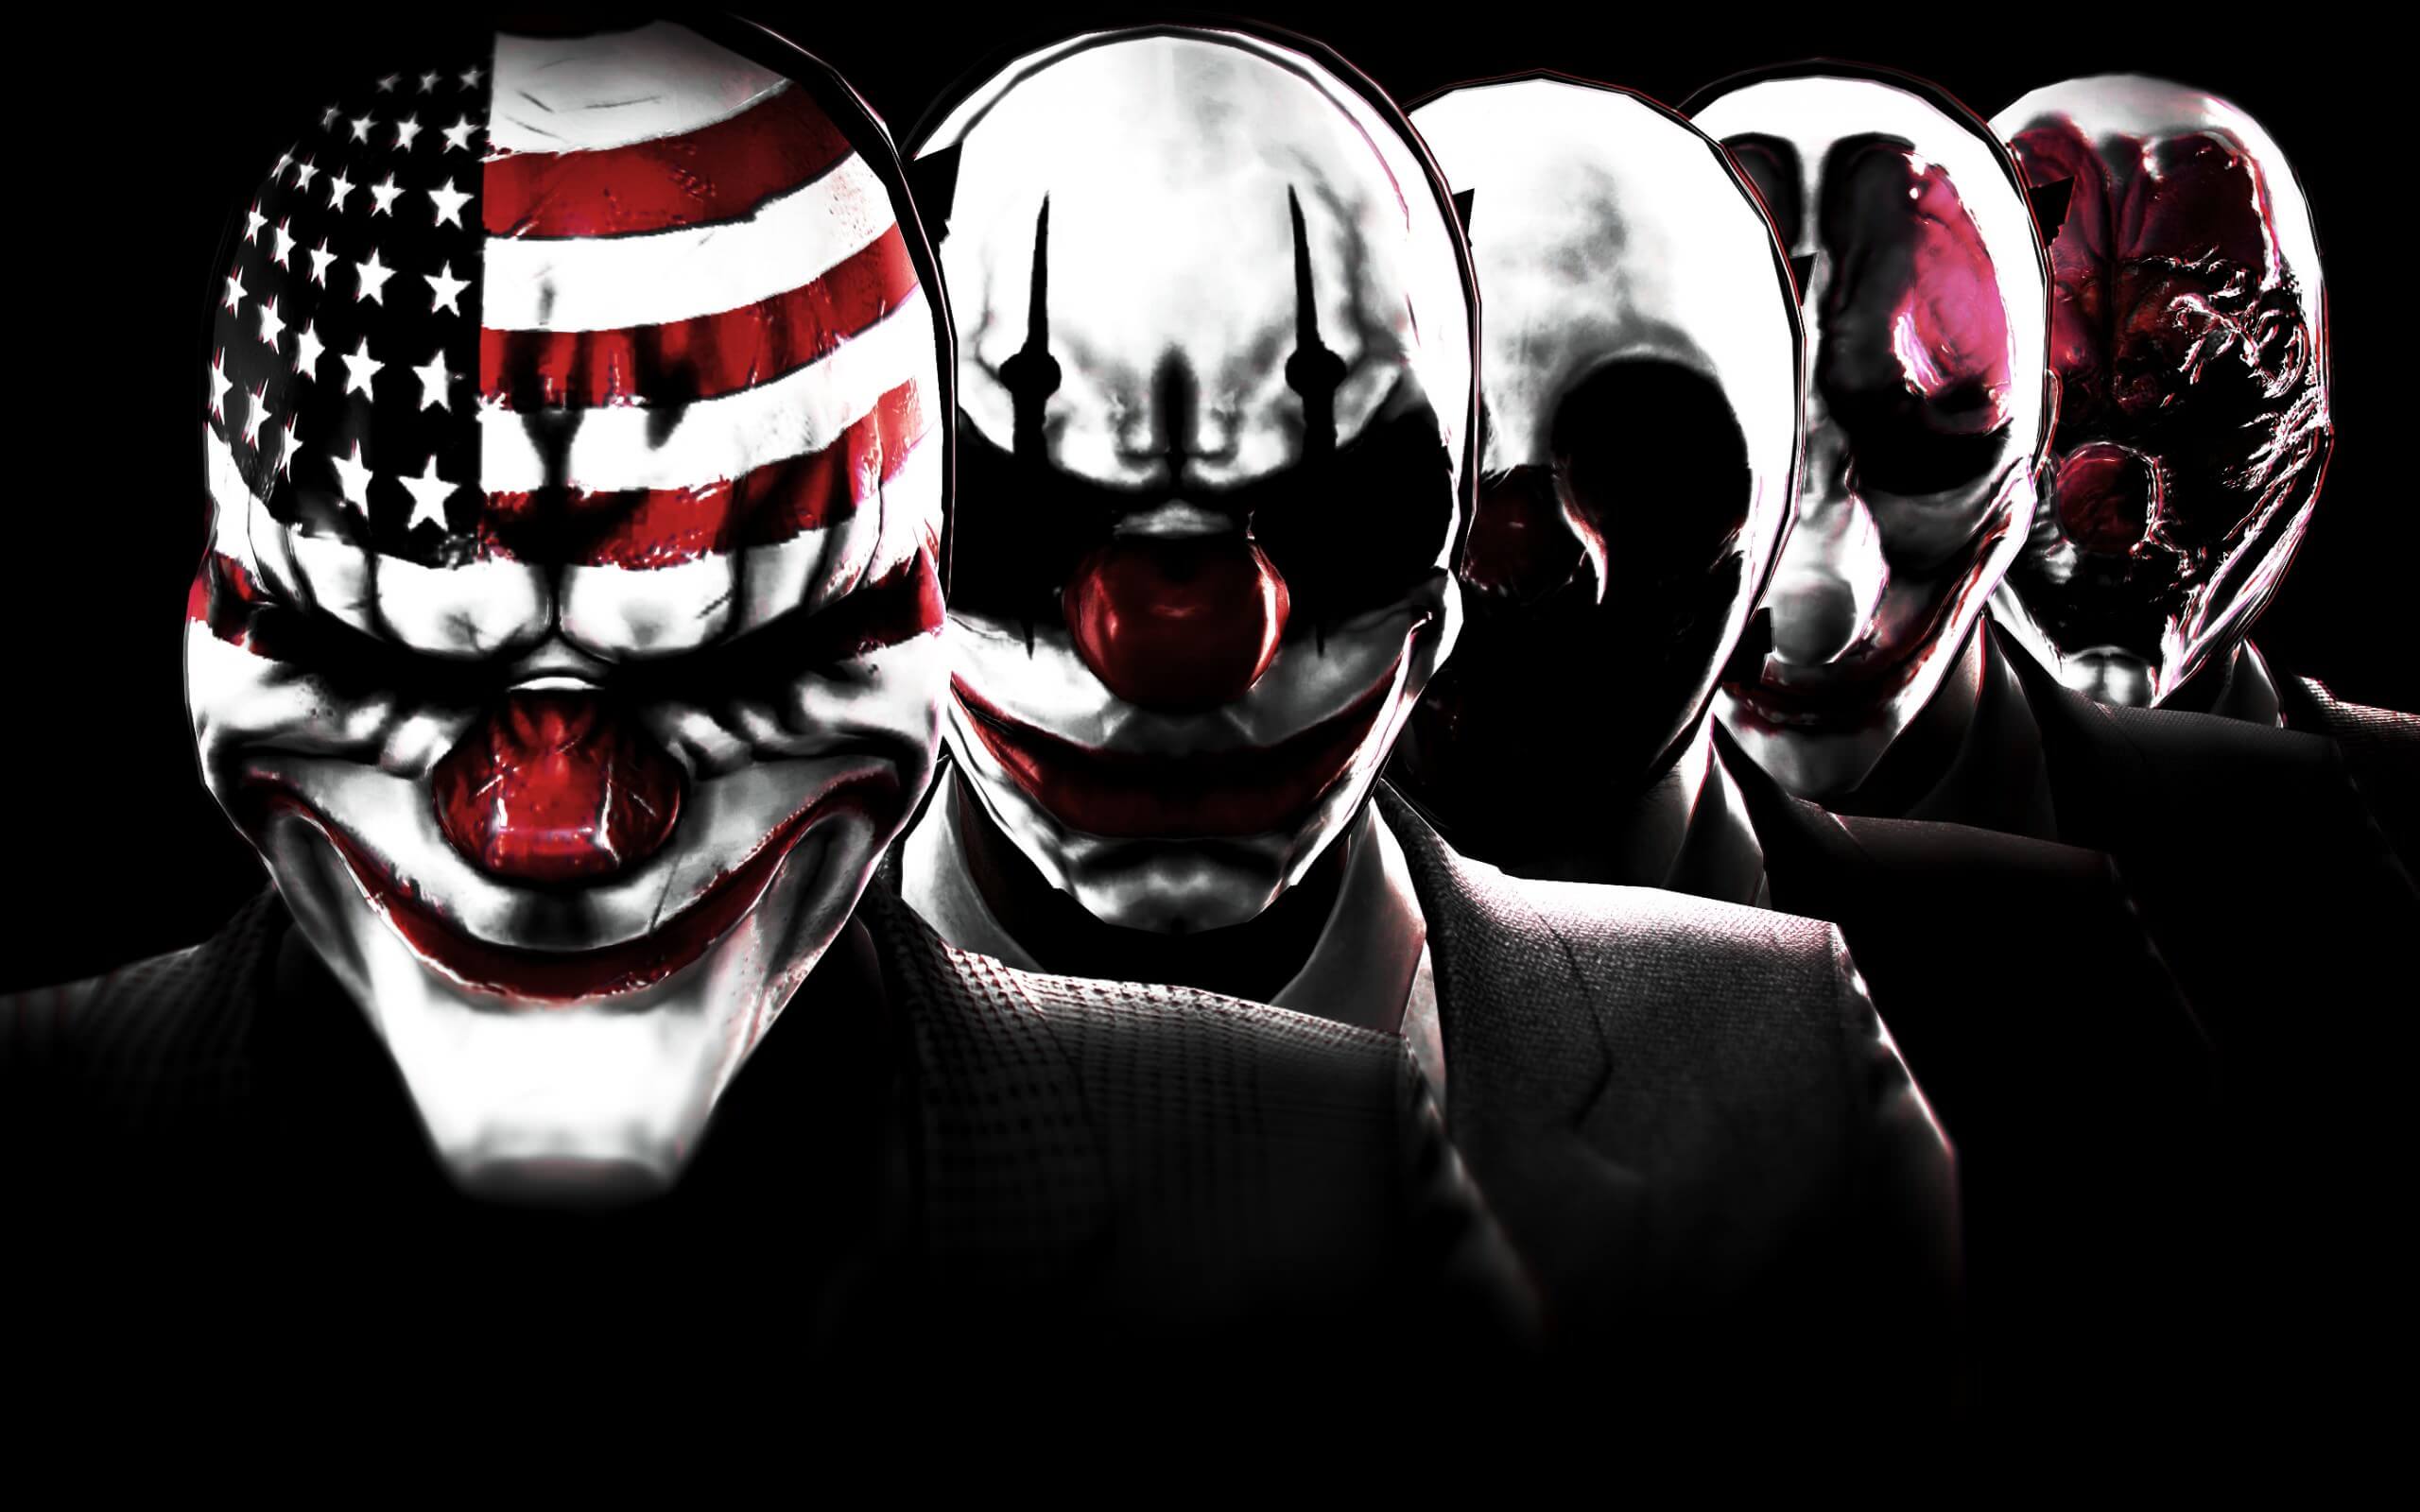 payday 2 full game free download pc